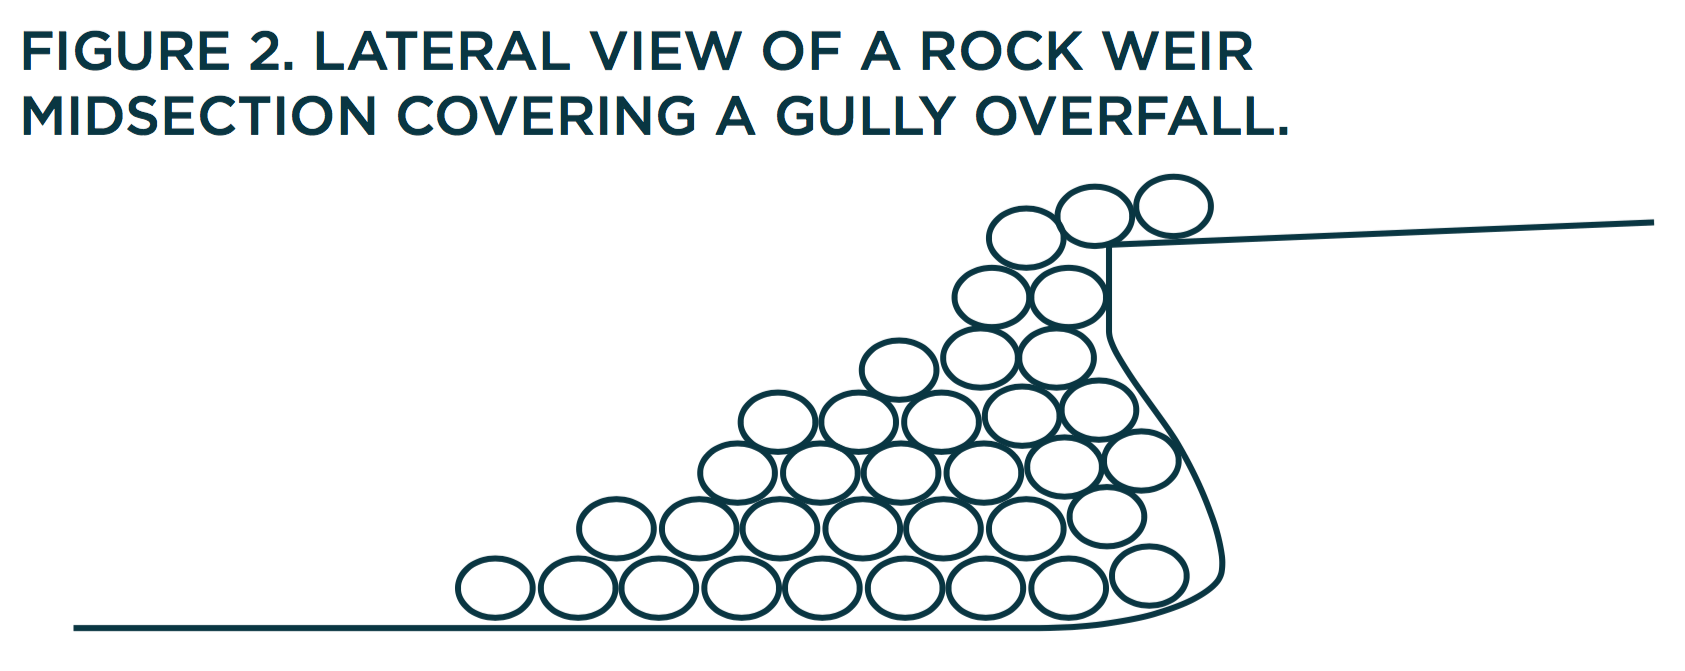 Figure 2. Lateral view of a rock weir midsection covering a gully overfall